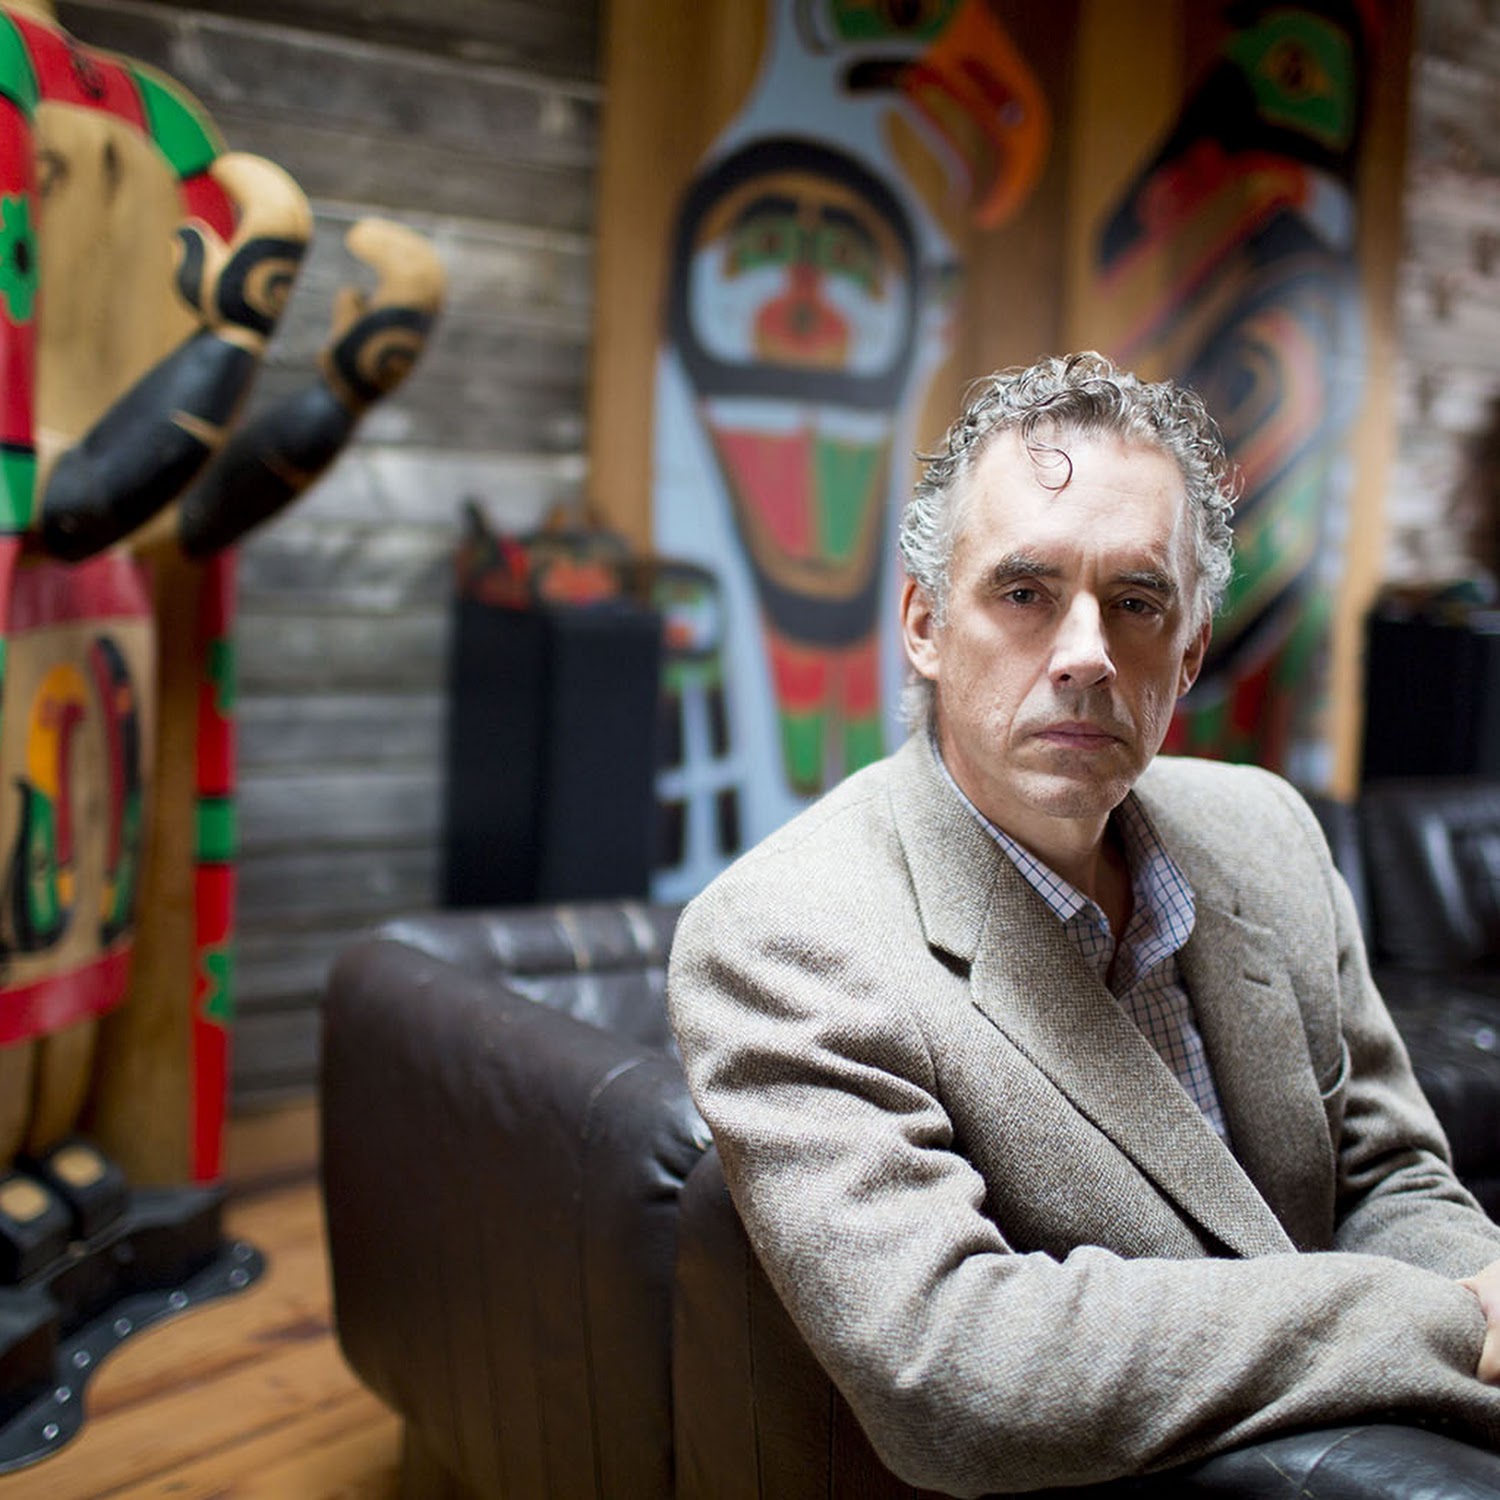 Isn't is ironic? Jordan B Peterson's book stirred up chaos in the